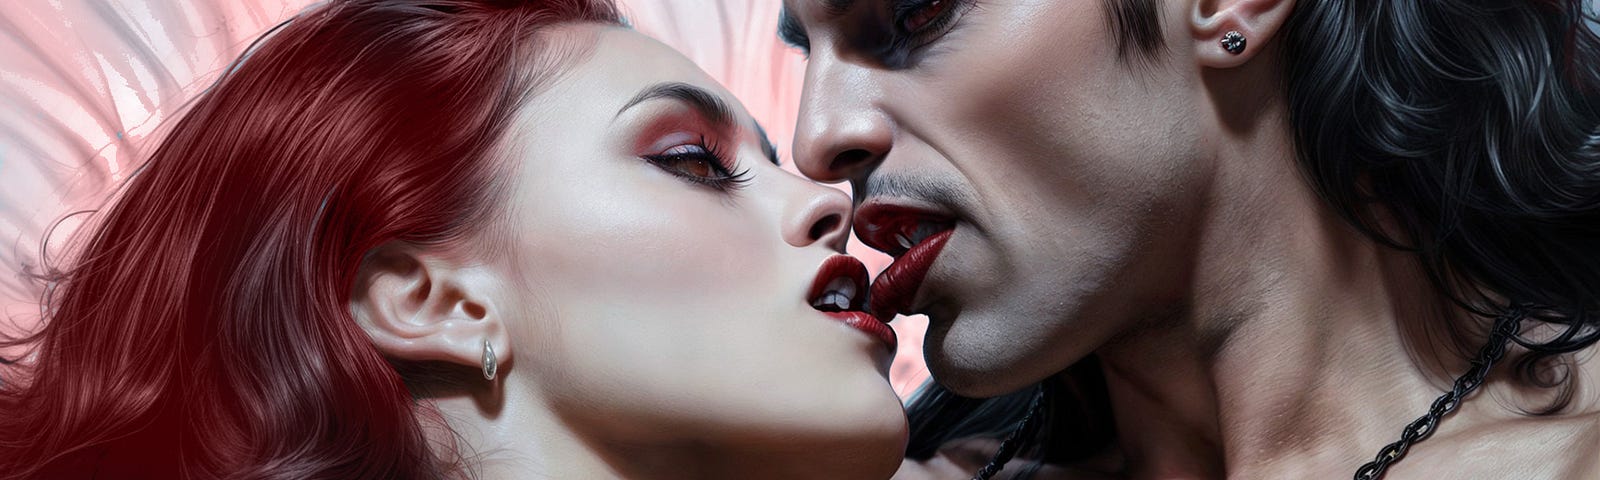 Sexy vampire looking man with fangs kissing a woman in bed. Erotic image for erotic story